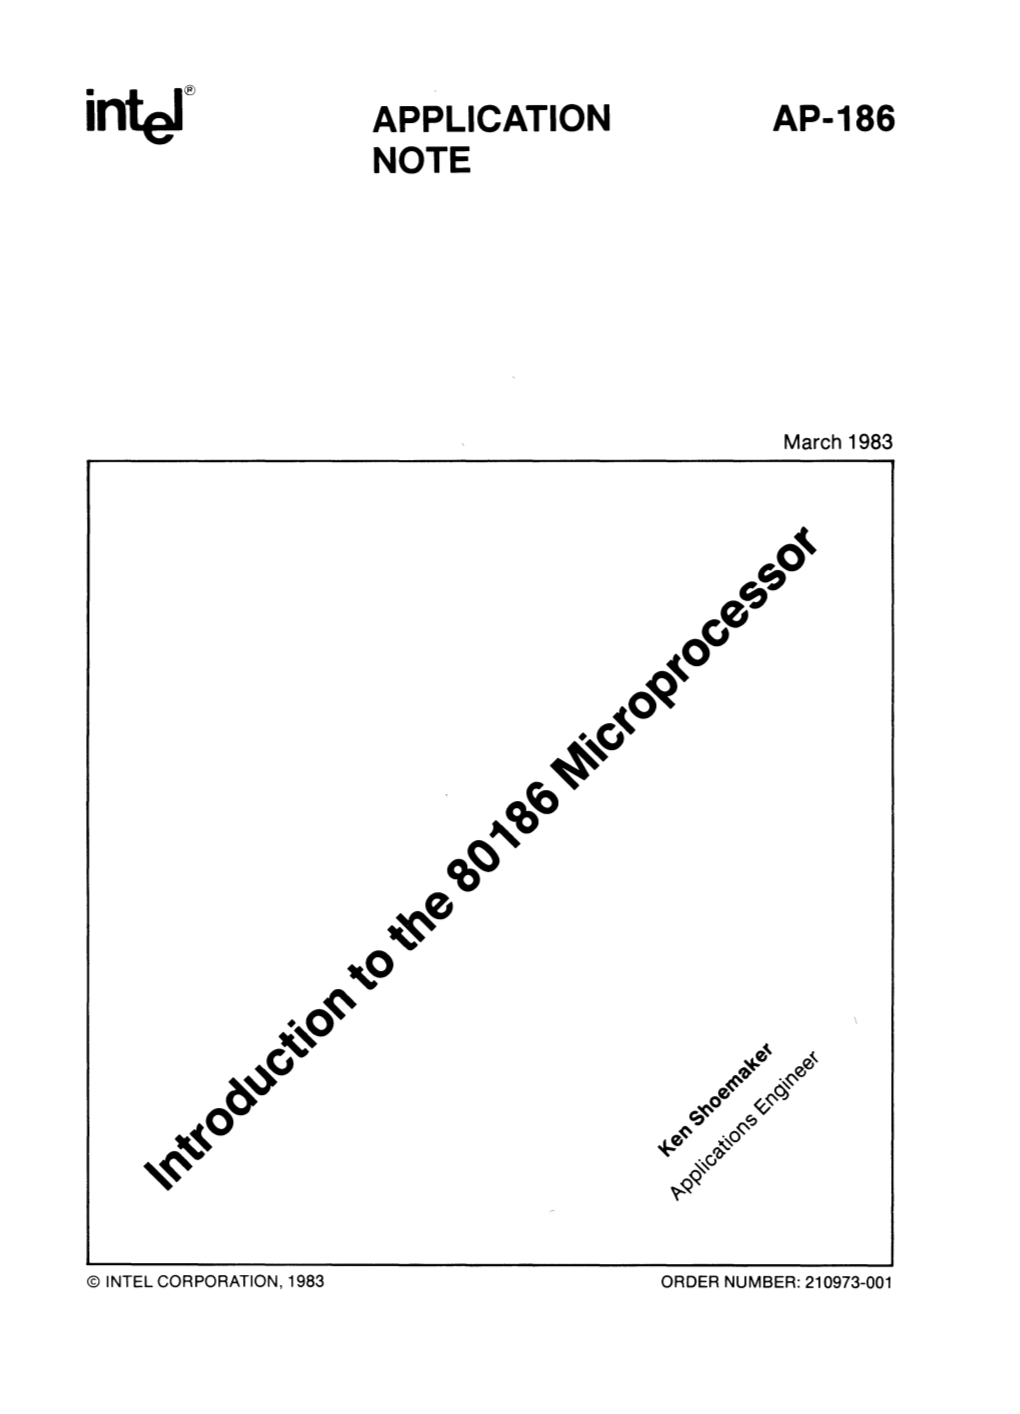 AP-186 Introduction to the 80186 Microprocessor Mar83